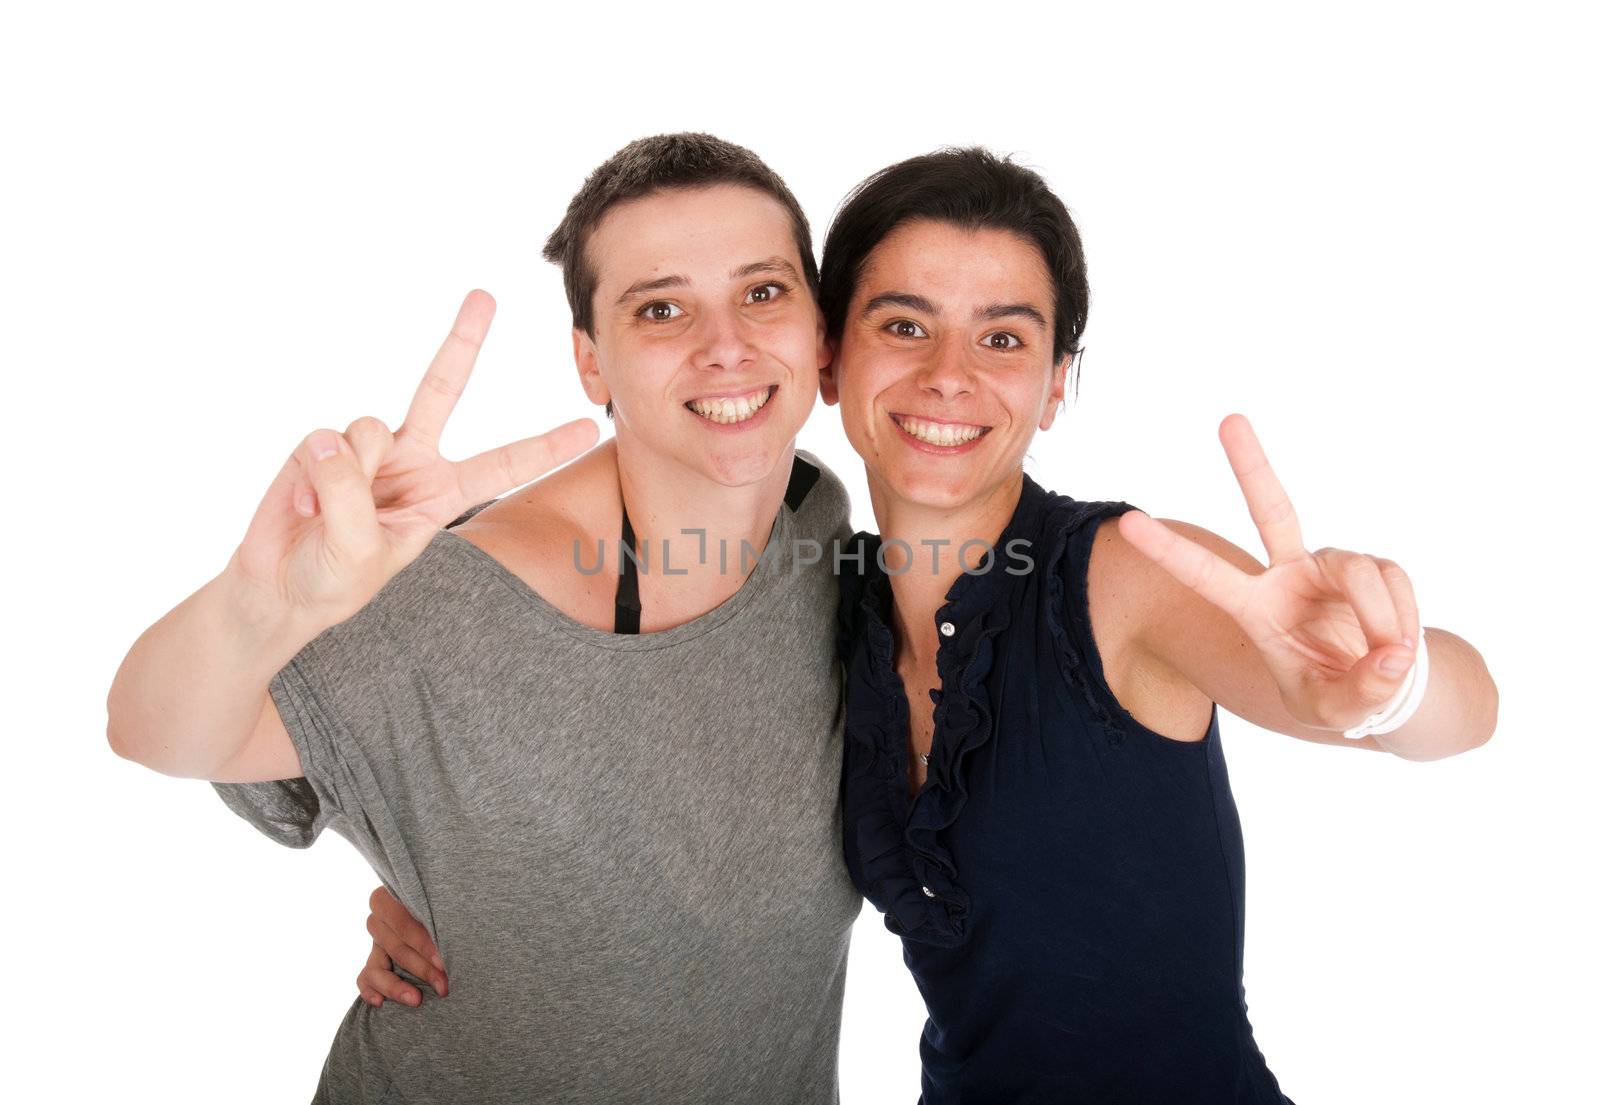 Sisters showing victory sign by luissantos84